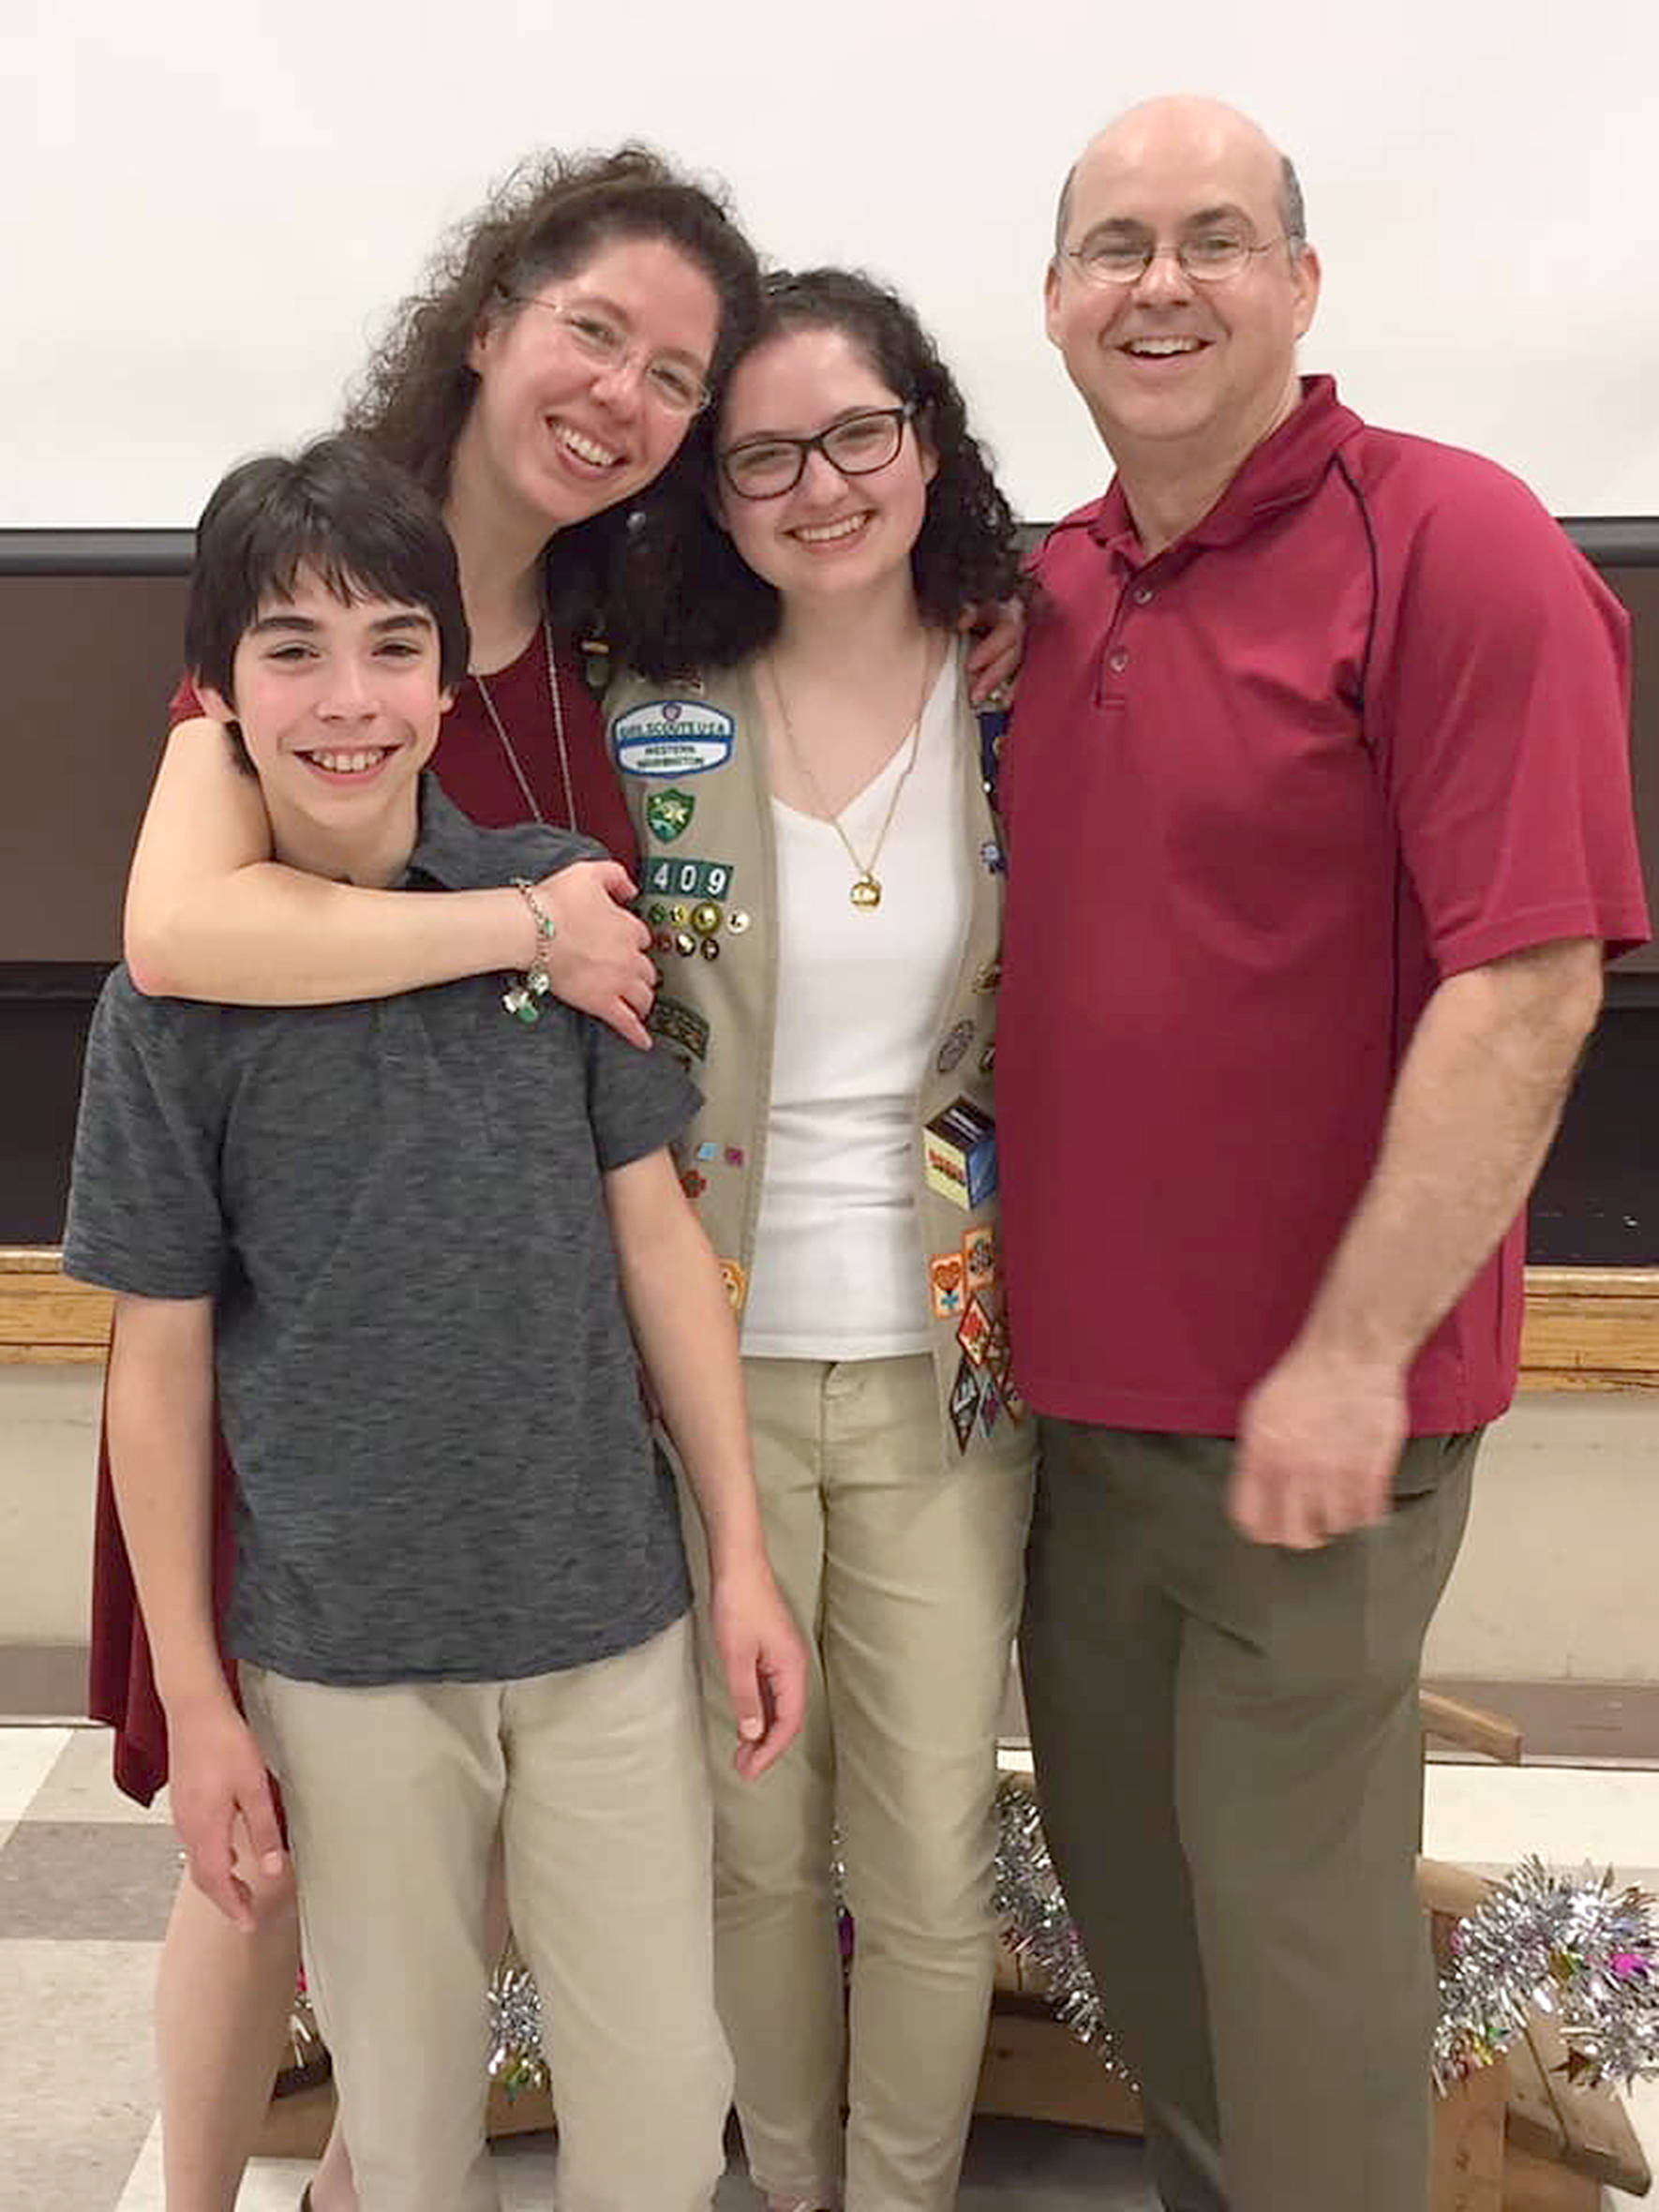 Arina Poggioli stands with her family after earning her Girl Scout Gold Award in May. COURTESY PHOTO, Poggioli